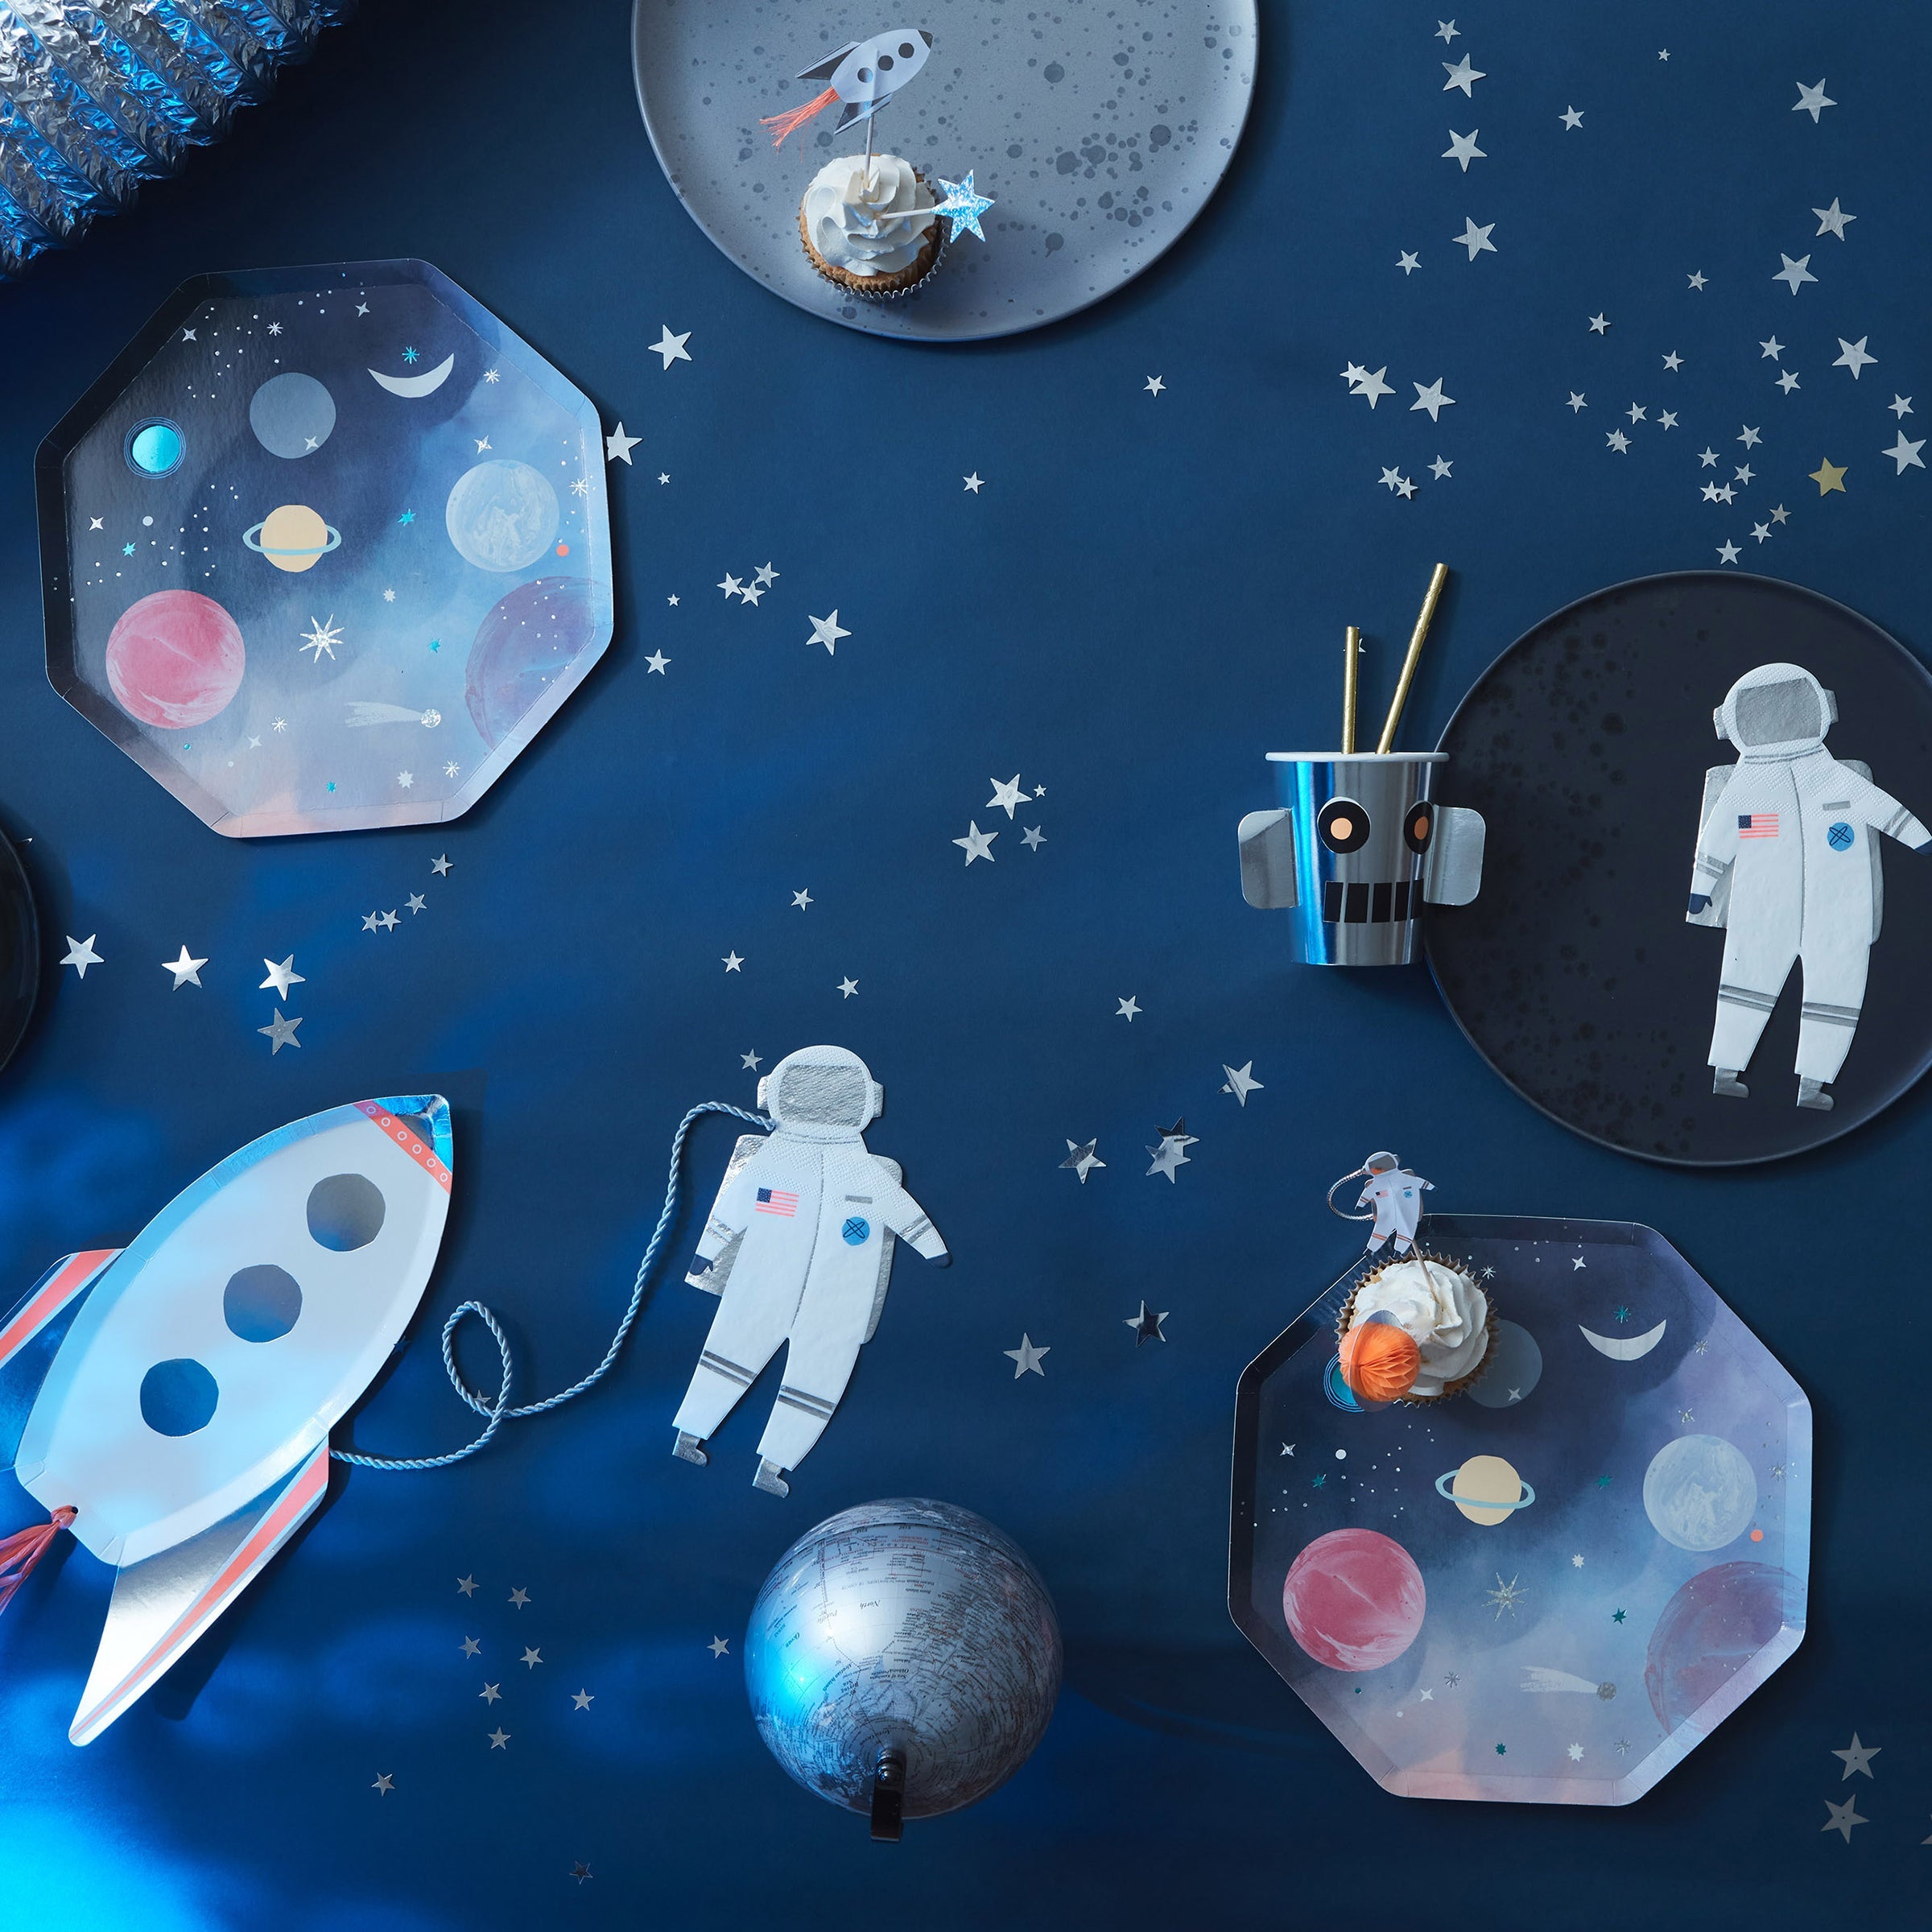 Our paper plates feature brightly colored planets and stars for an out-of-this world astronaut party.